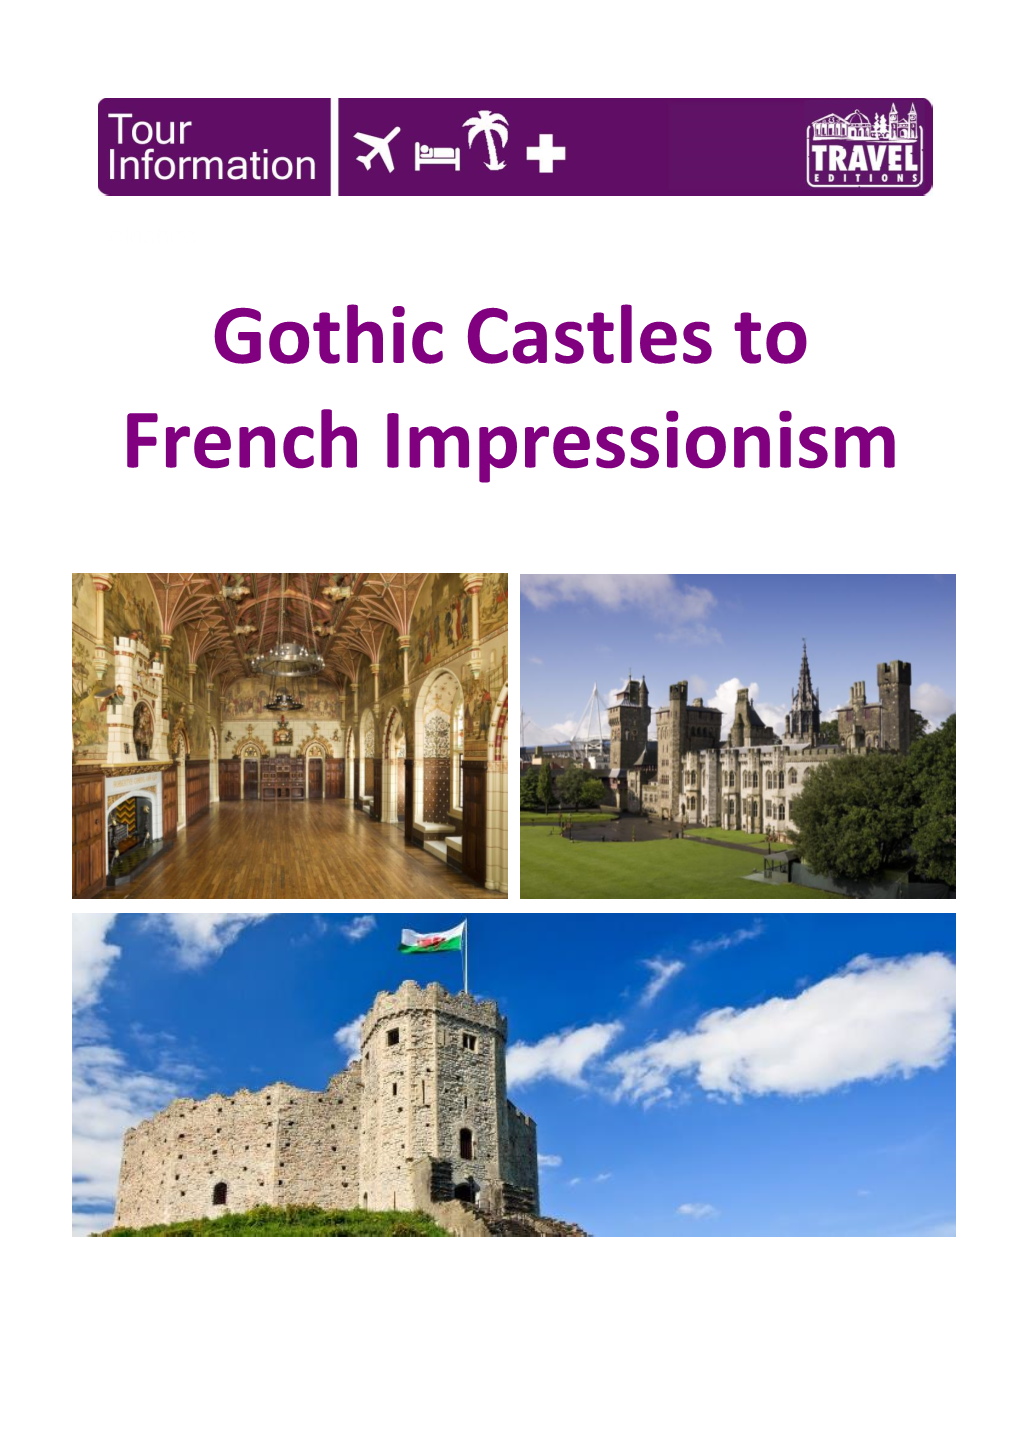 Gothic Castles to French Impressionism